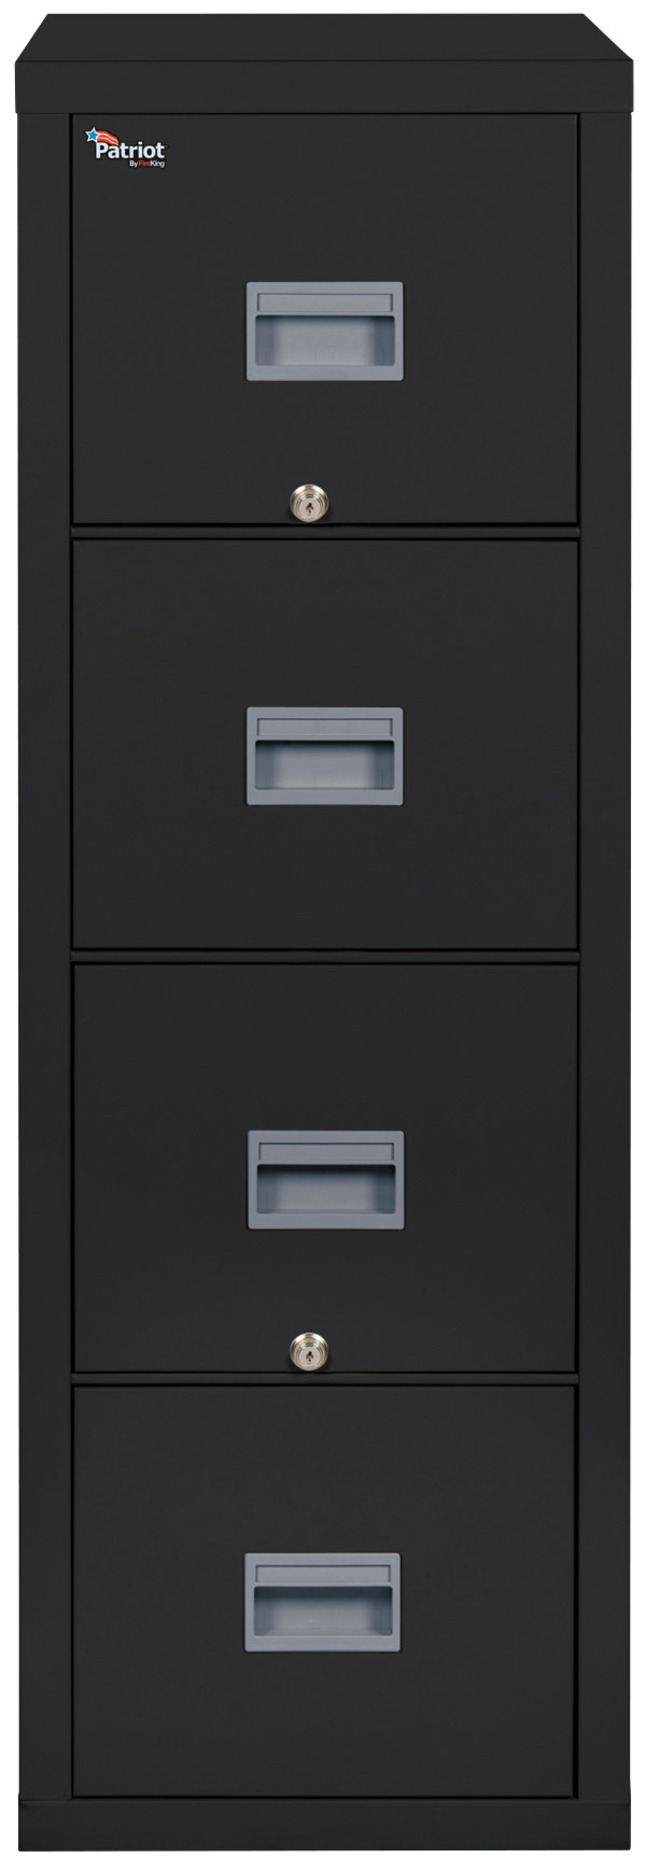 FireKing Patriot Vertical Letter Size File Cabinet, 4- drawers, 18 x 32 x 53"